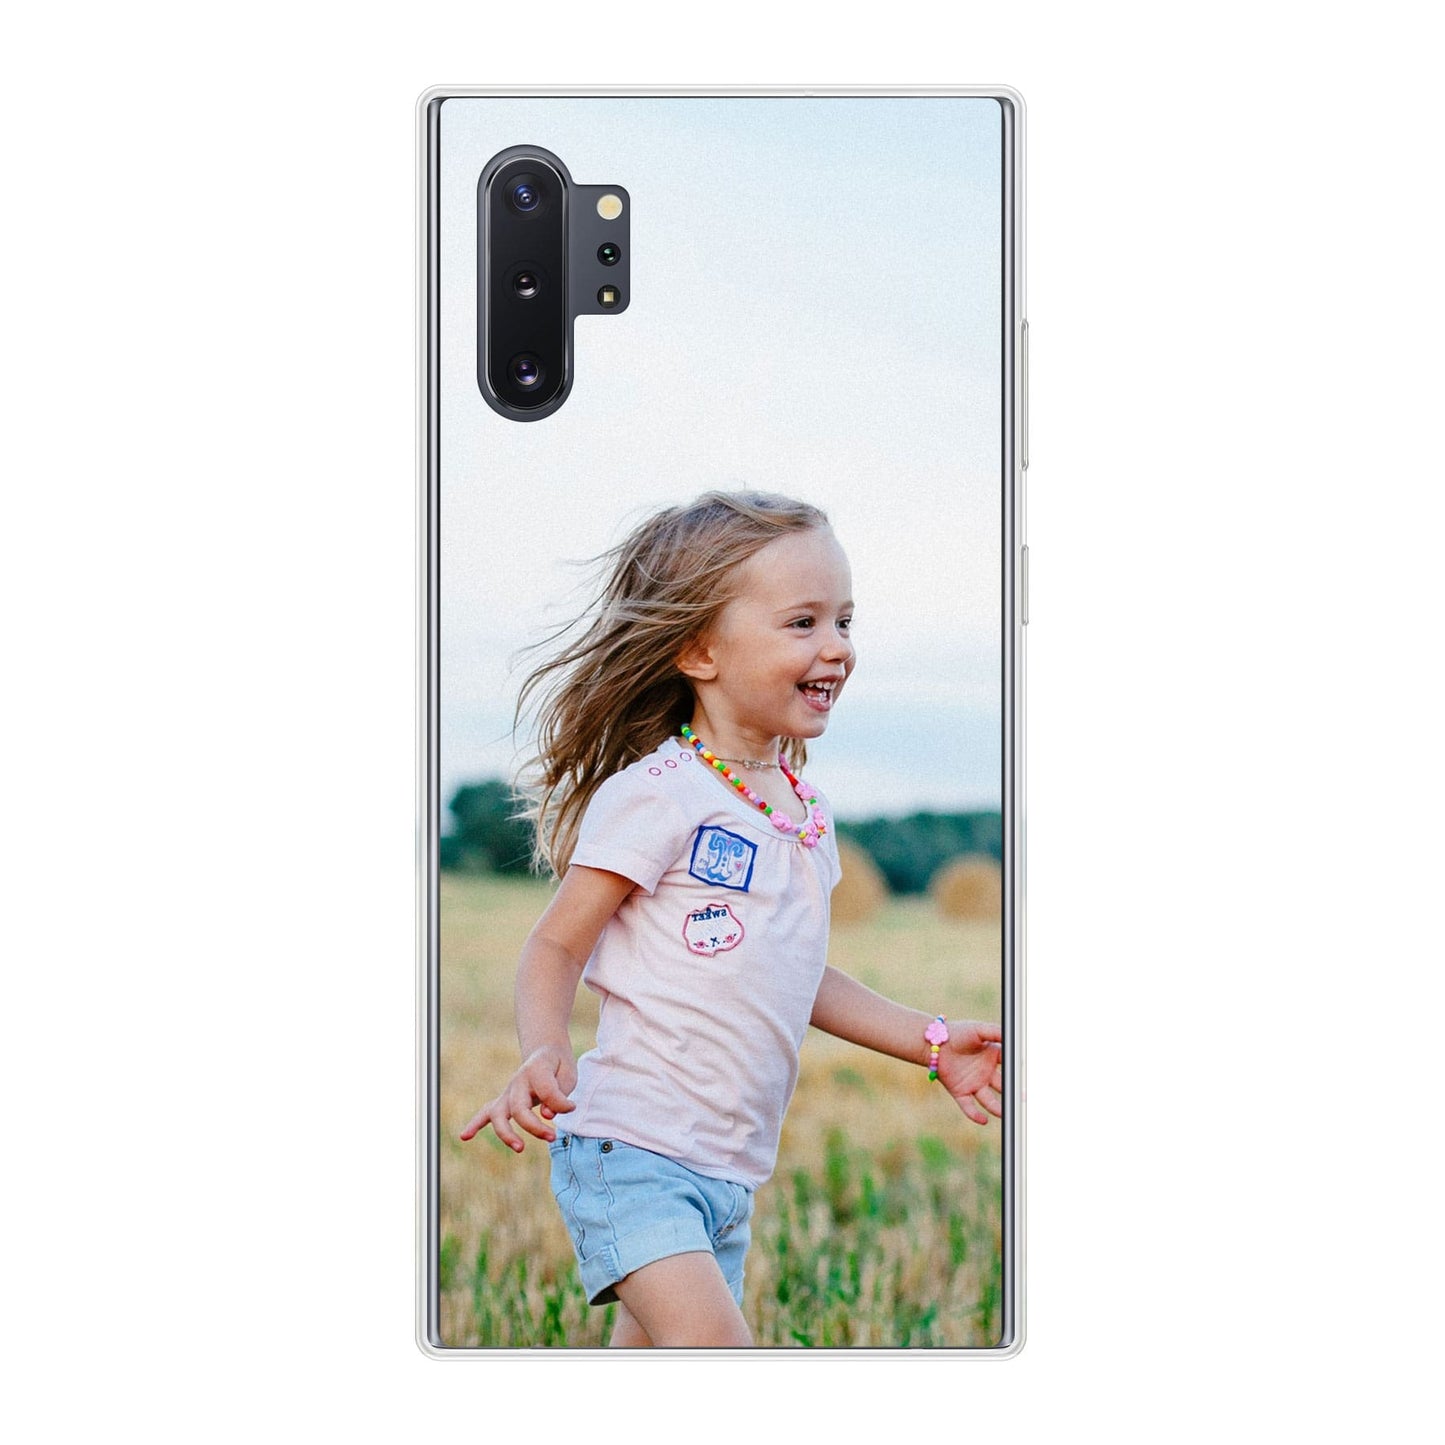 Galaxy Note 10 Plus Hülle Softcase transparent